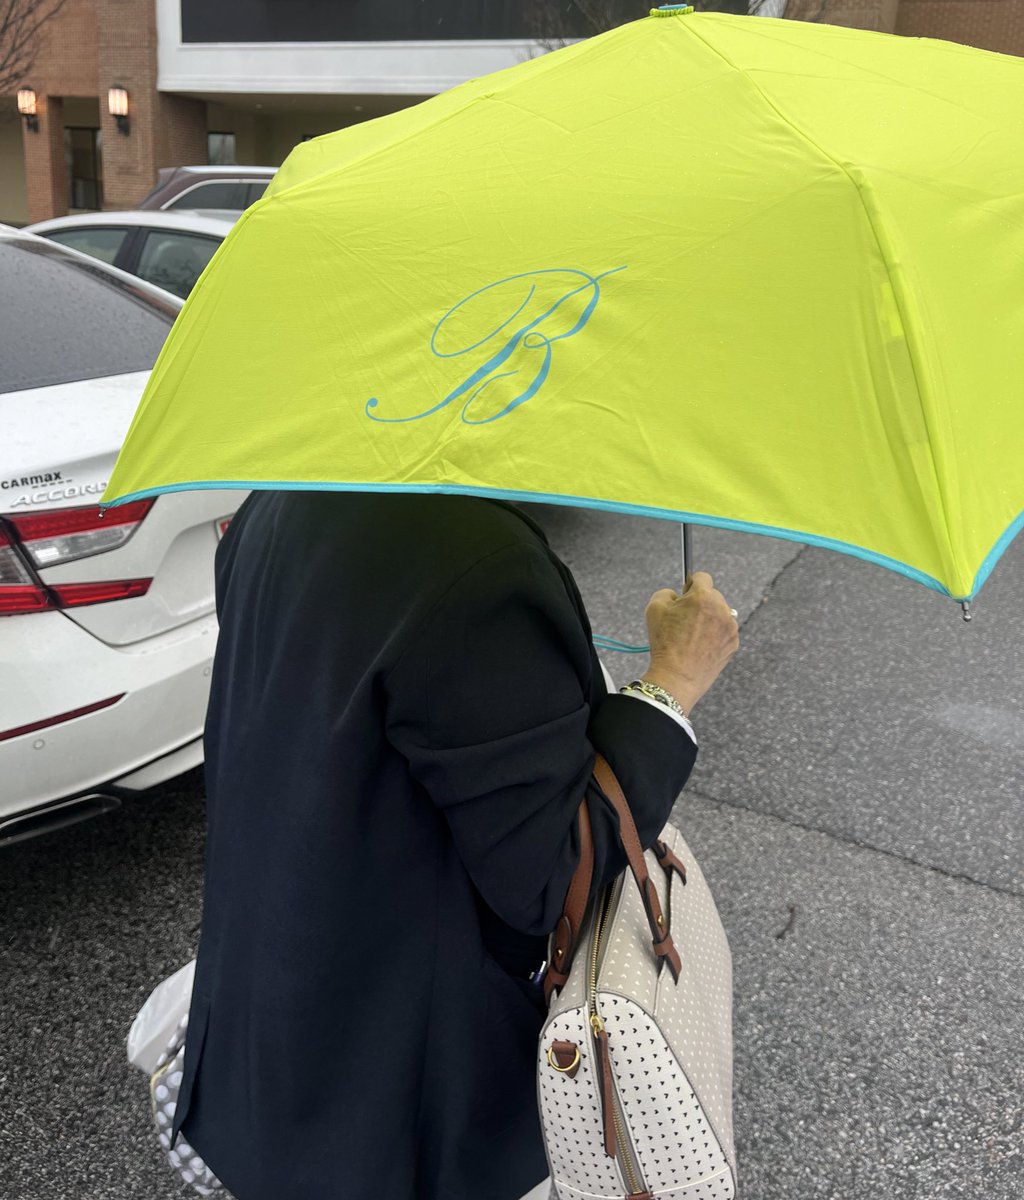 somebody come get they auntie 😂😂😂 me n babs pull up at work at the same time and i’m like girl?!?!! is that a B on your umbrella???!!!!!??!?! like she is such an icon my god i love her